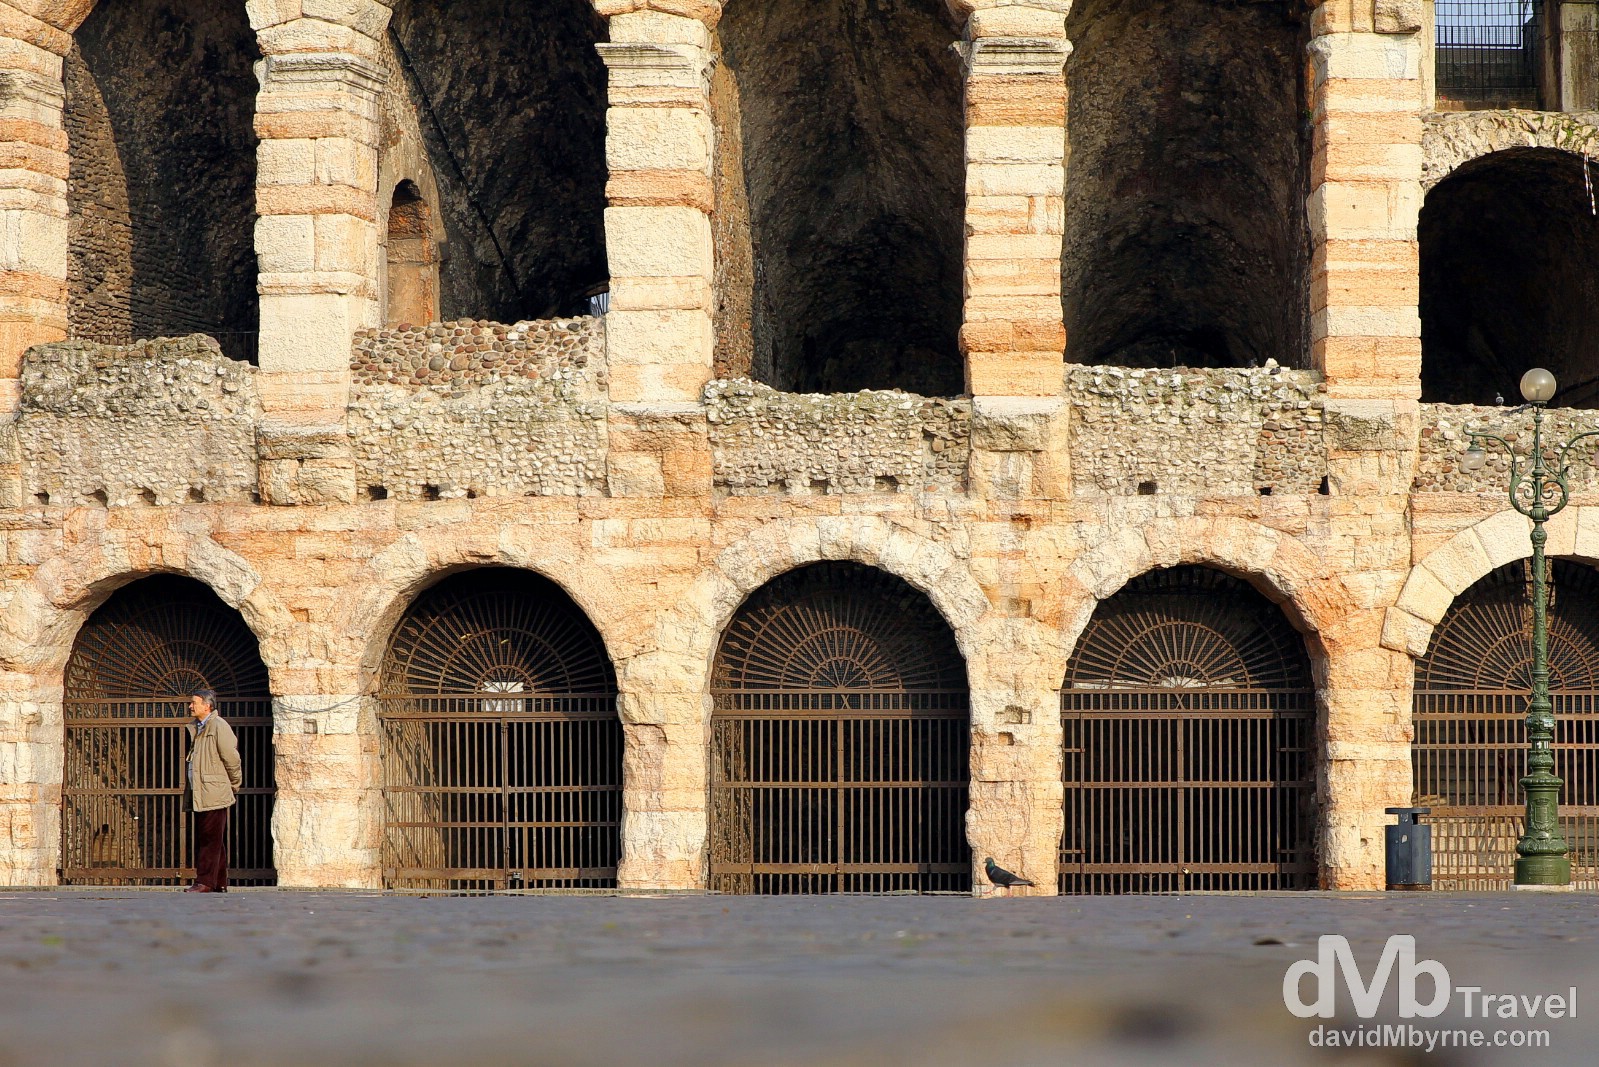 The exterior of The Arena from across Plaza Bra in Verona, Italy. March 17, 2014.